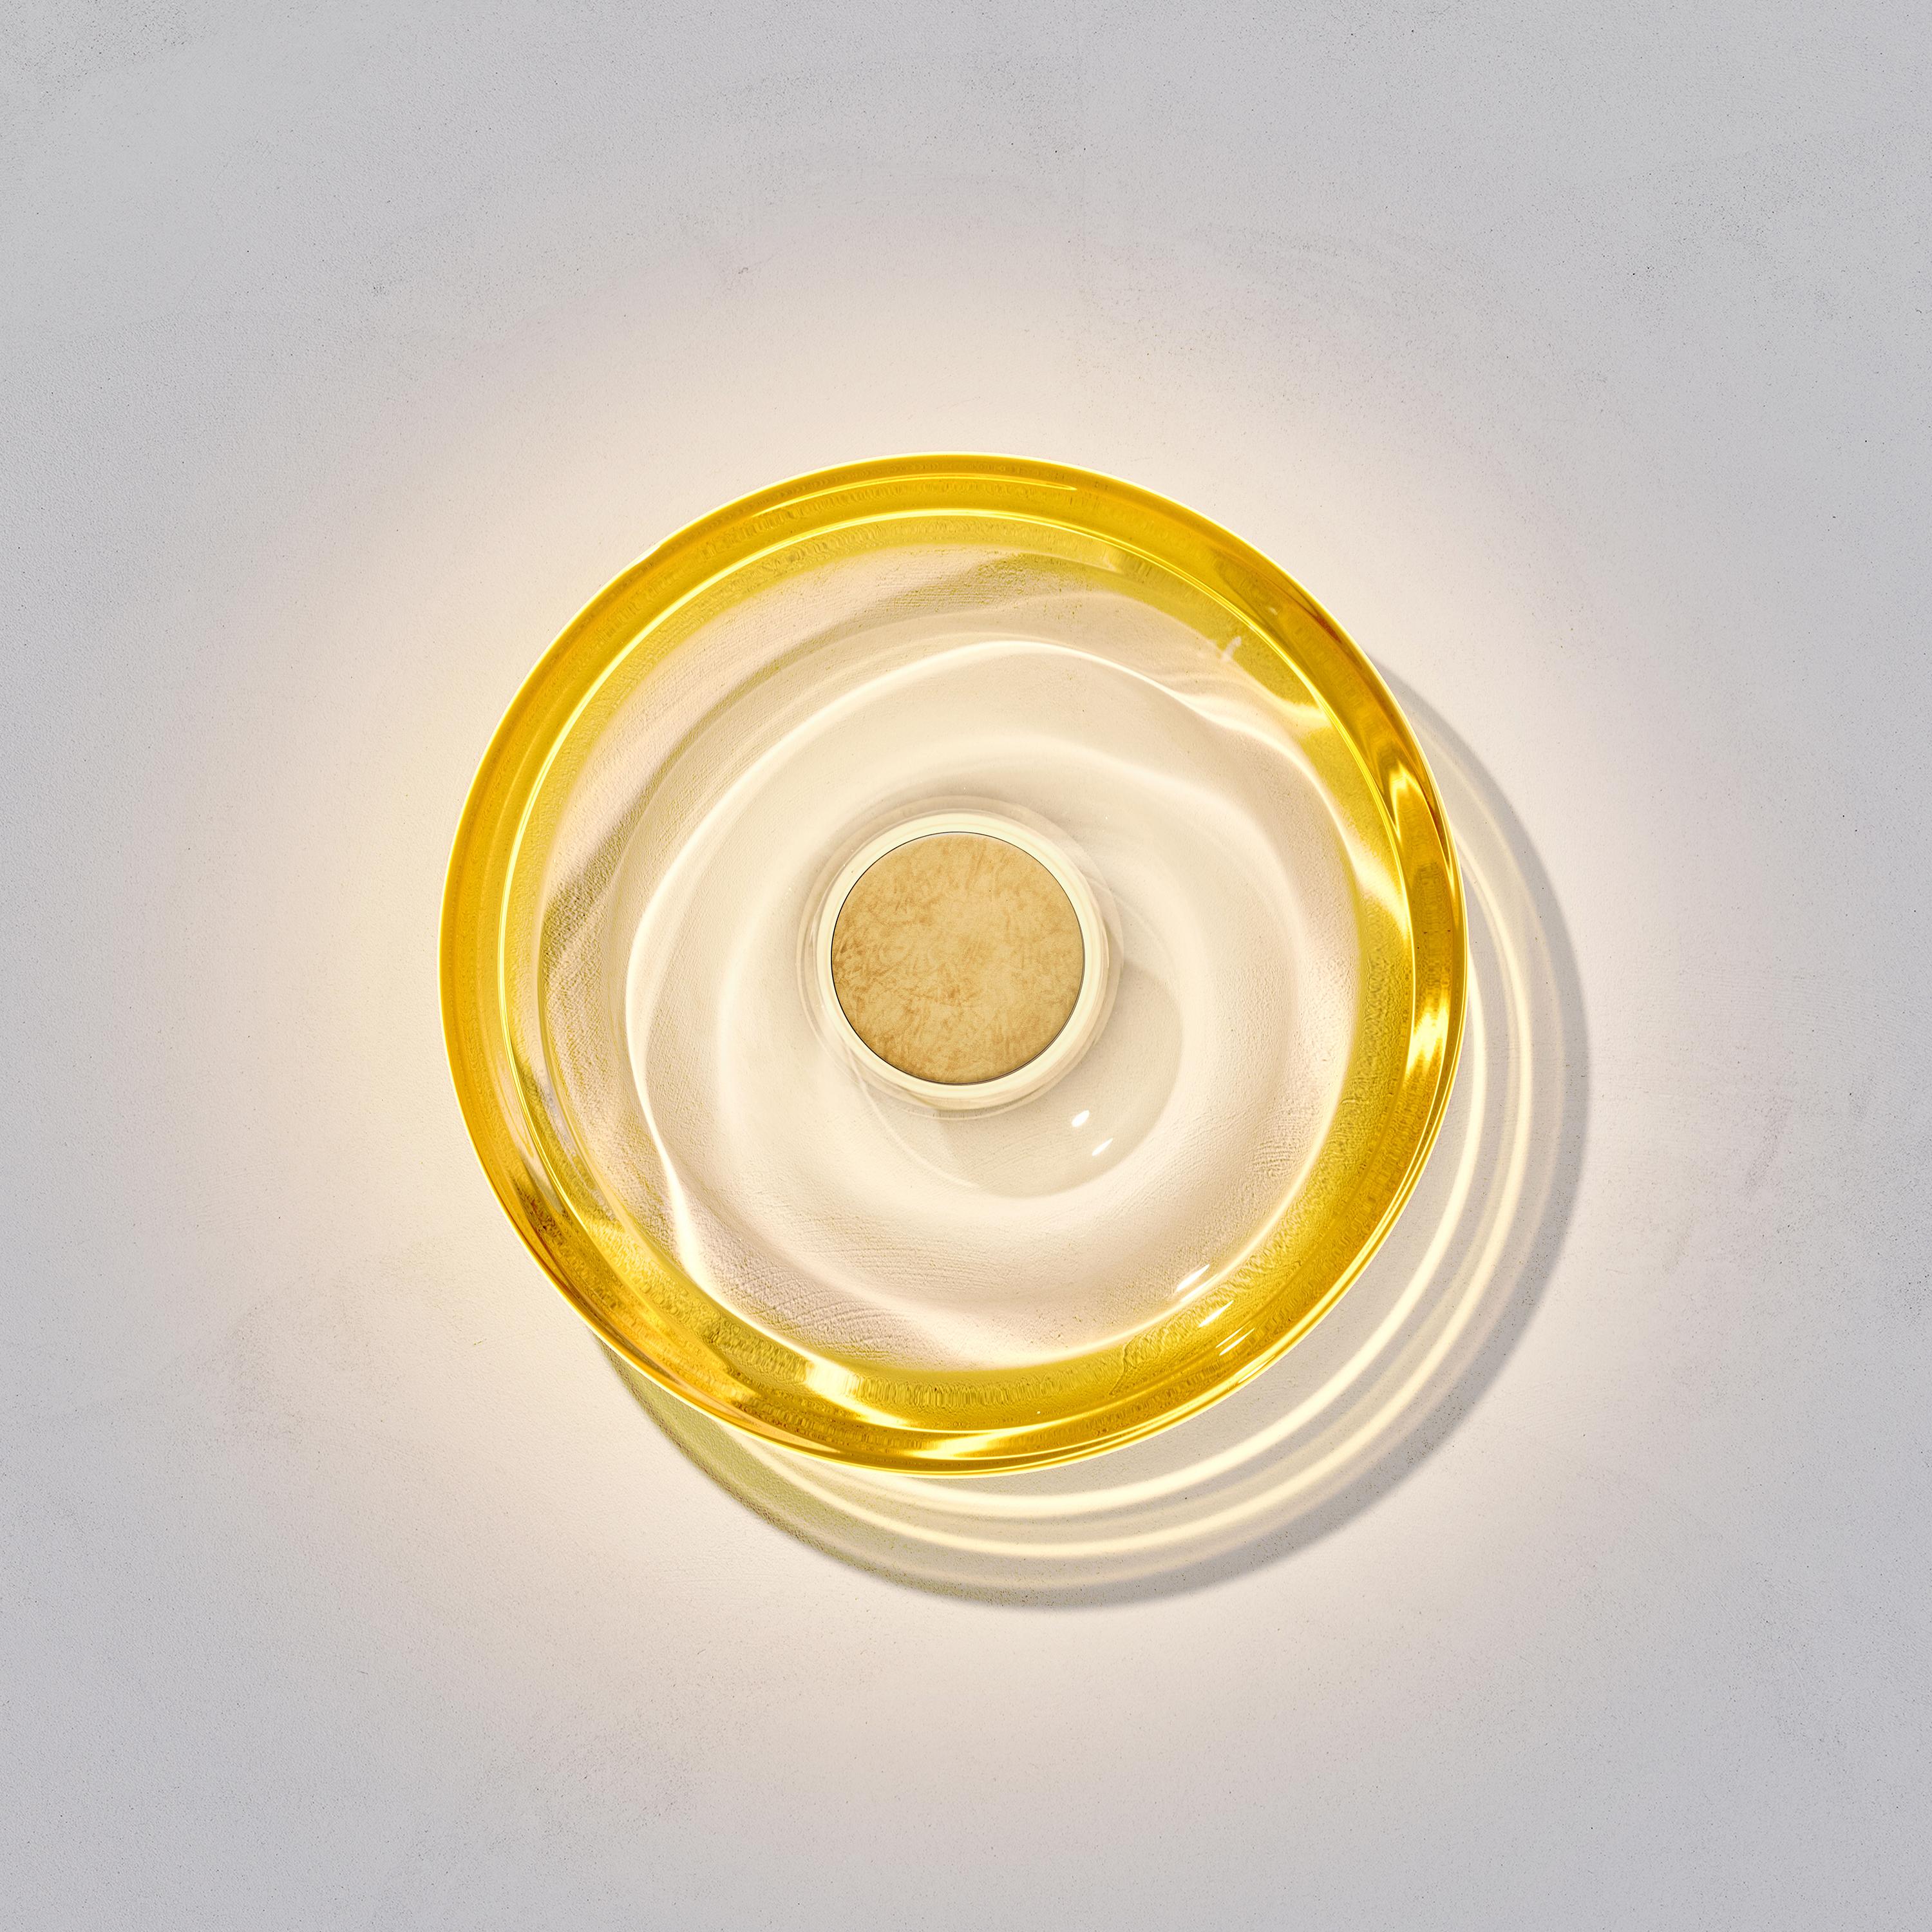 Liquid Amber wall light is designed by international illumination artist Eva Menz. Inspired by the circular ripples and reflections created on water, the yellow gradient glass is transformed into a beautiful sculptural sconce.

Each piece is